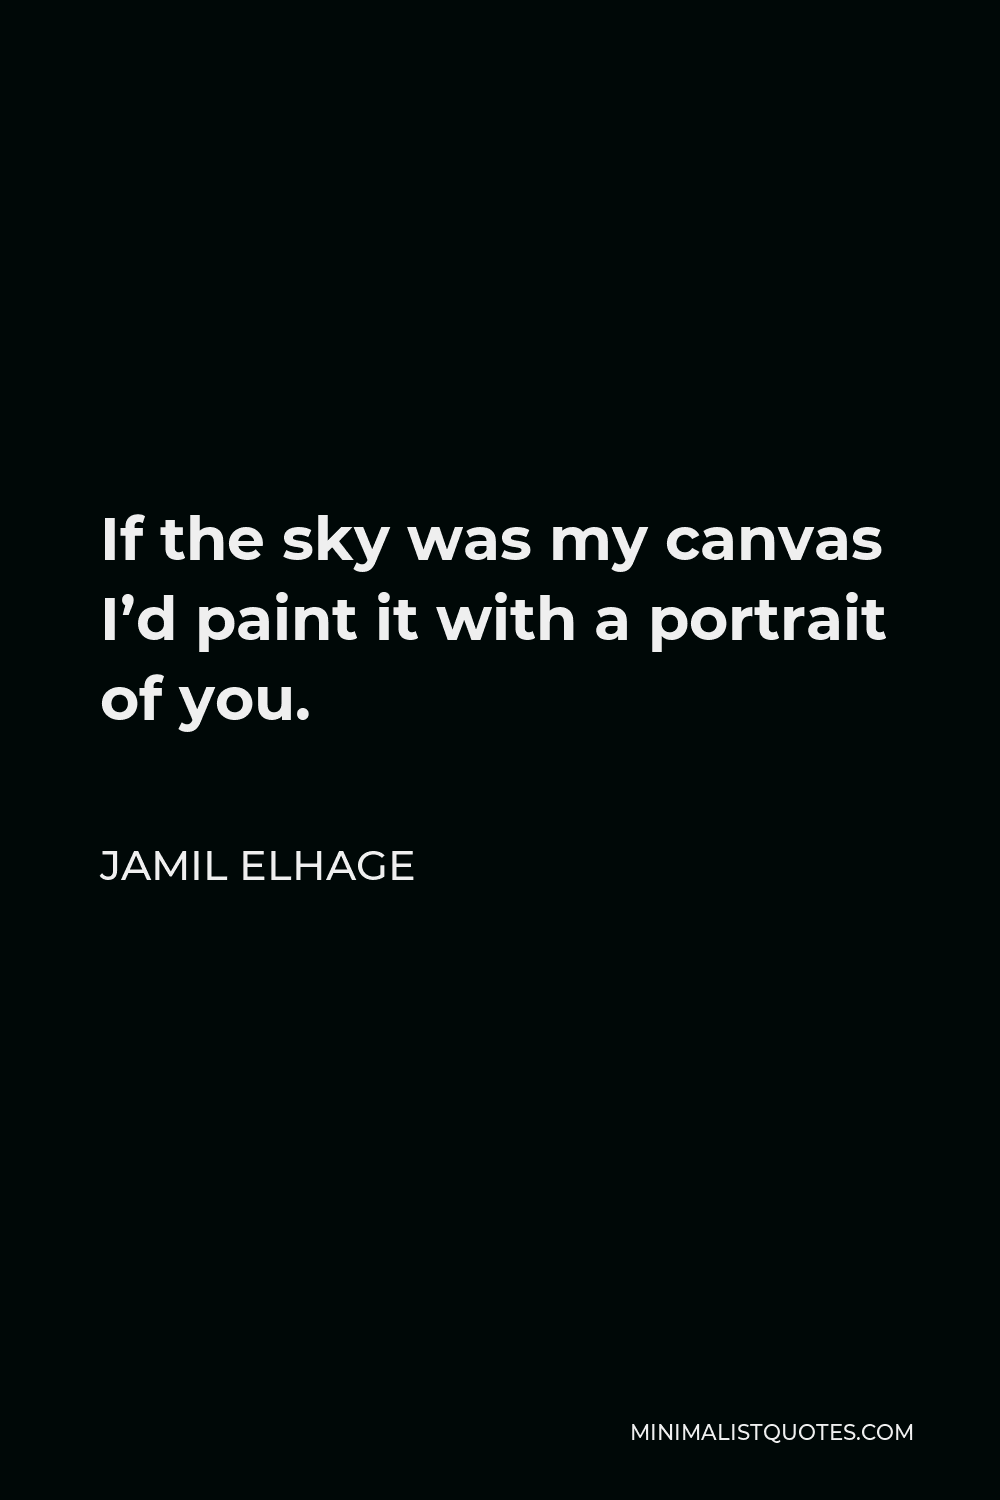 Jamil Elhage Quote - If the sky was my canvas I’d paint it with a portrait of you.